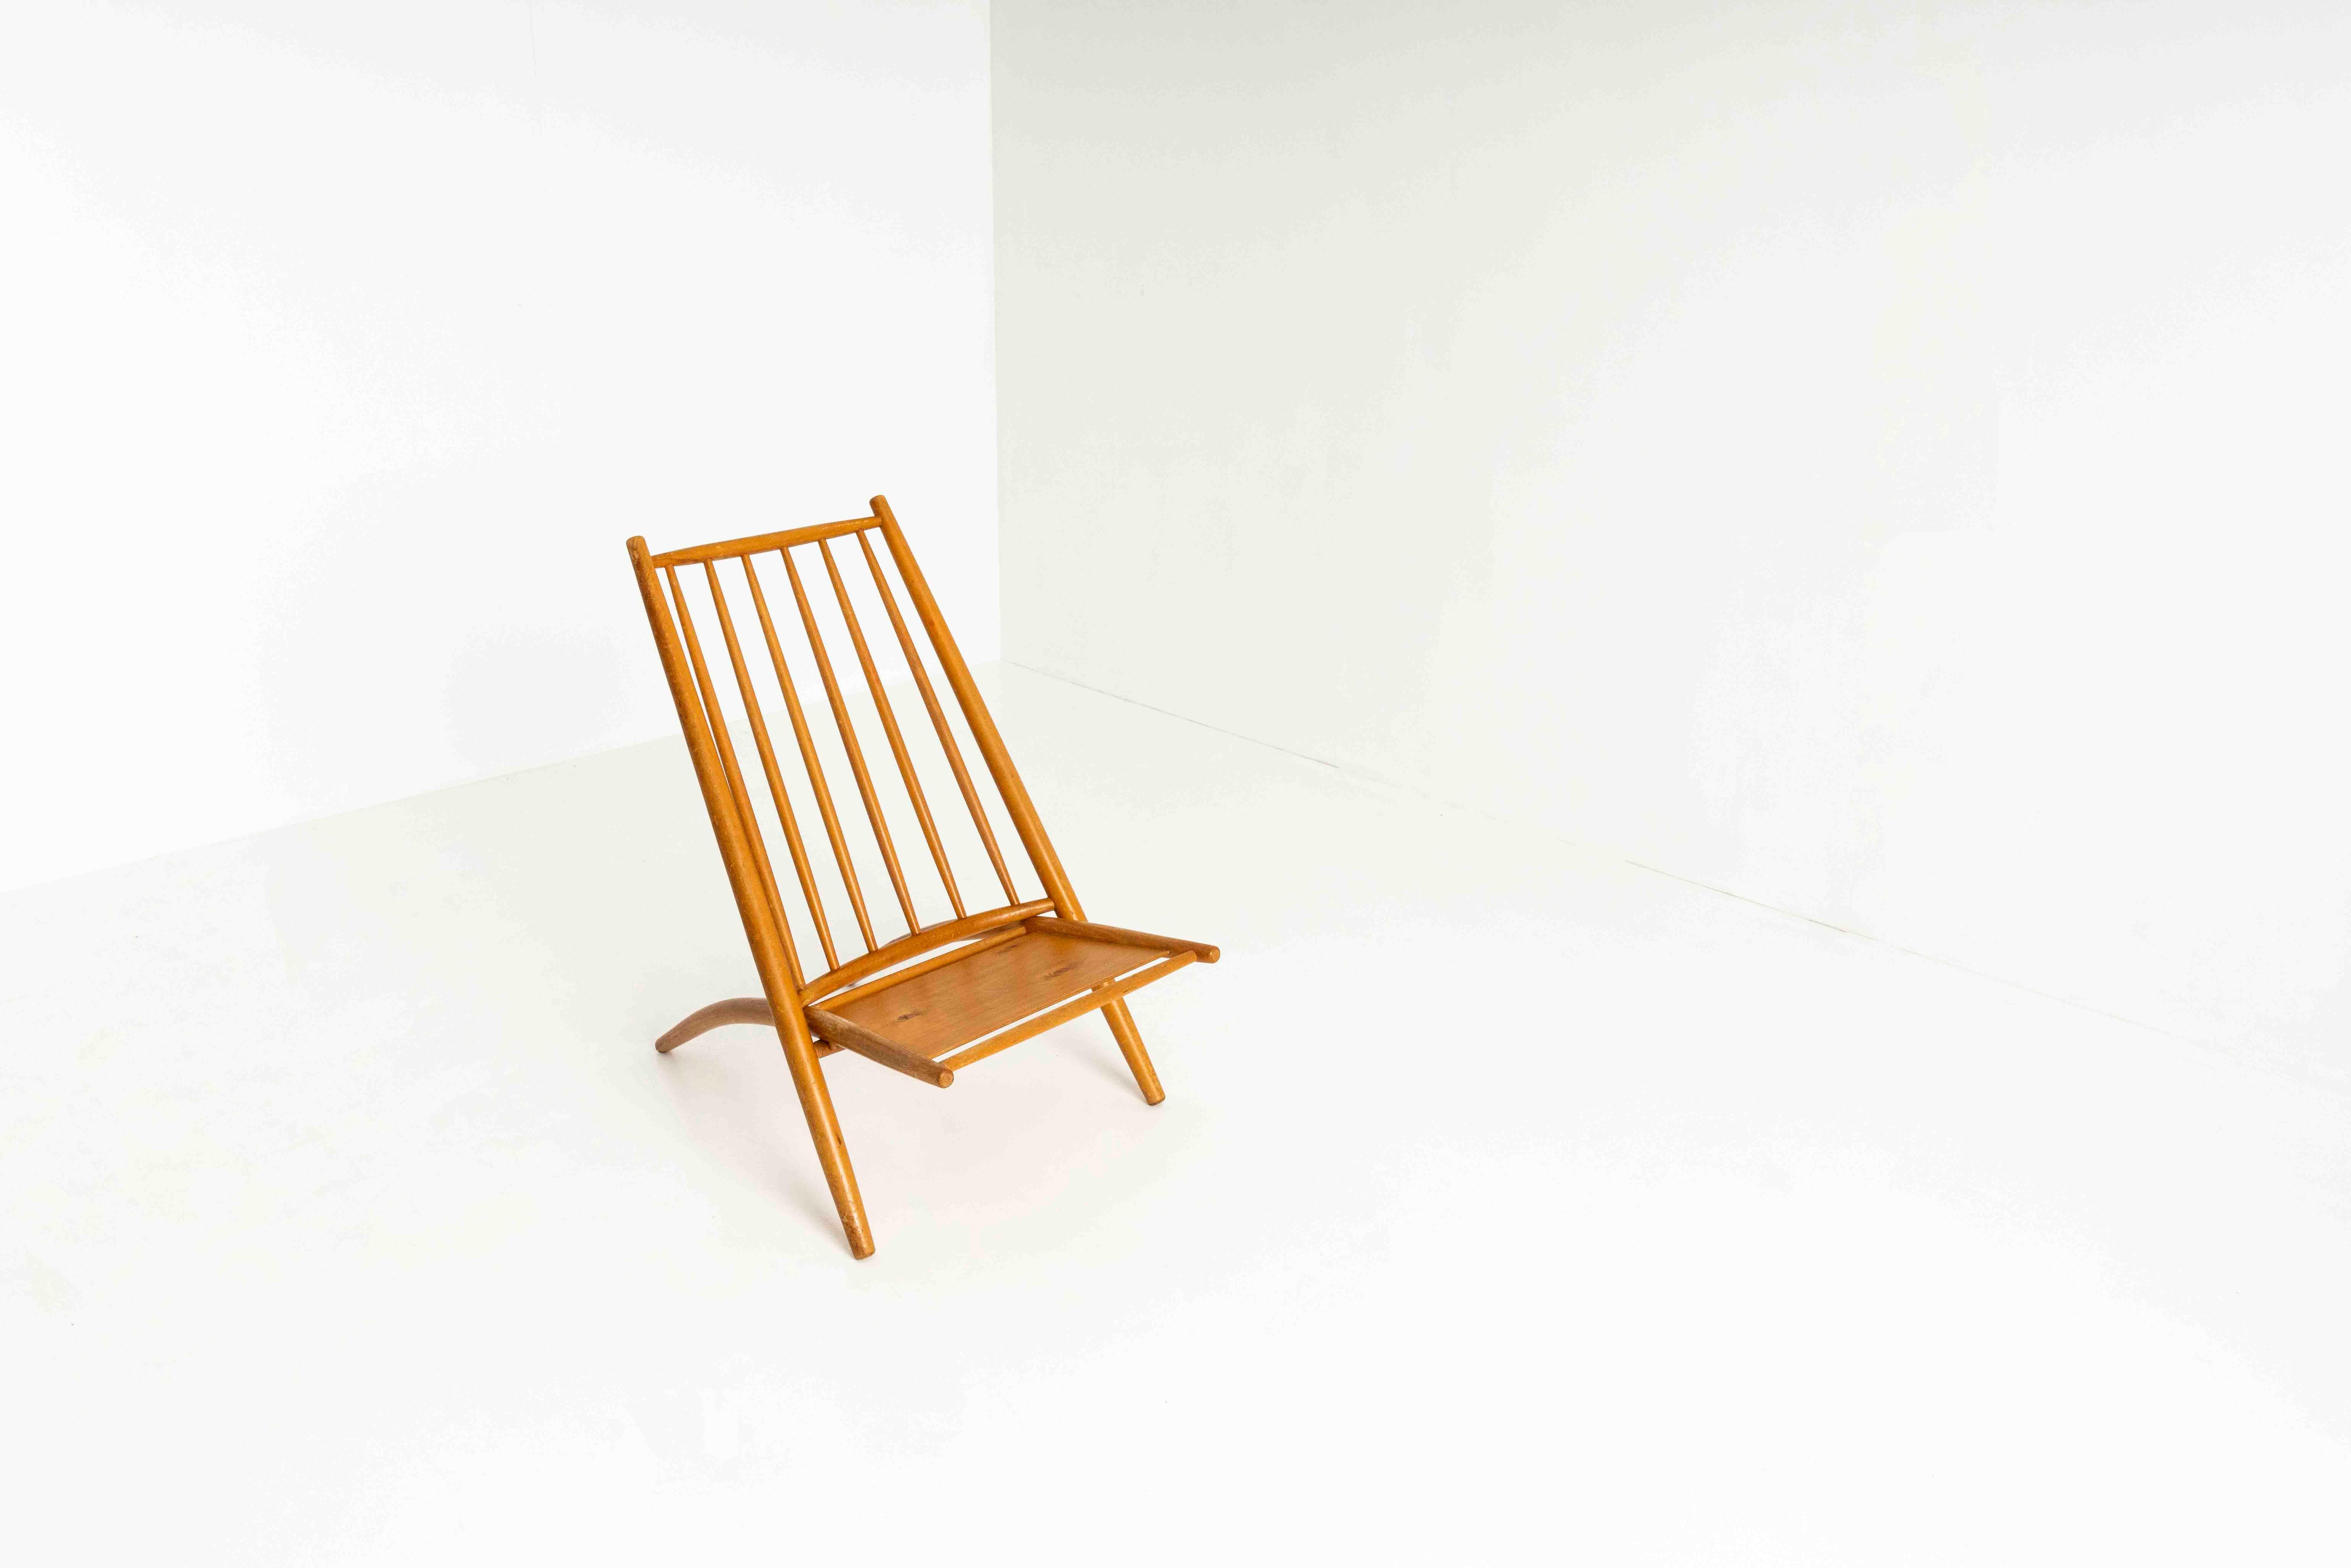 Nice Congo chair in Birch by Ilmari Tapiovaara for Asko 1960s. This smart construction consists of two parts that are put together without any screws and can be easily shipped or stored. The design is inspired by chairs of the tribes of West African